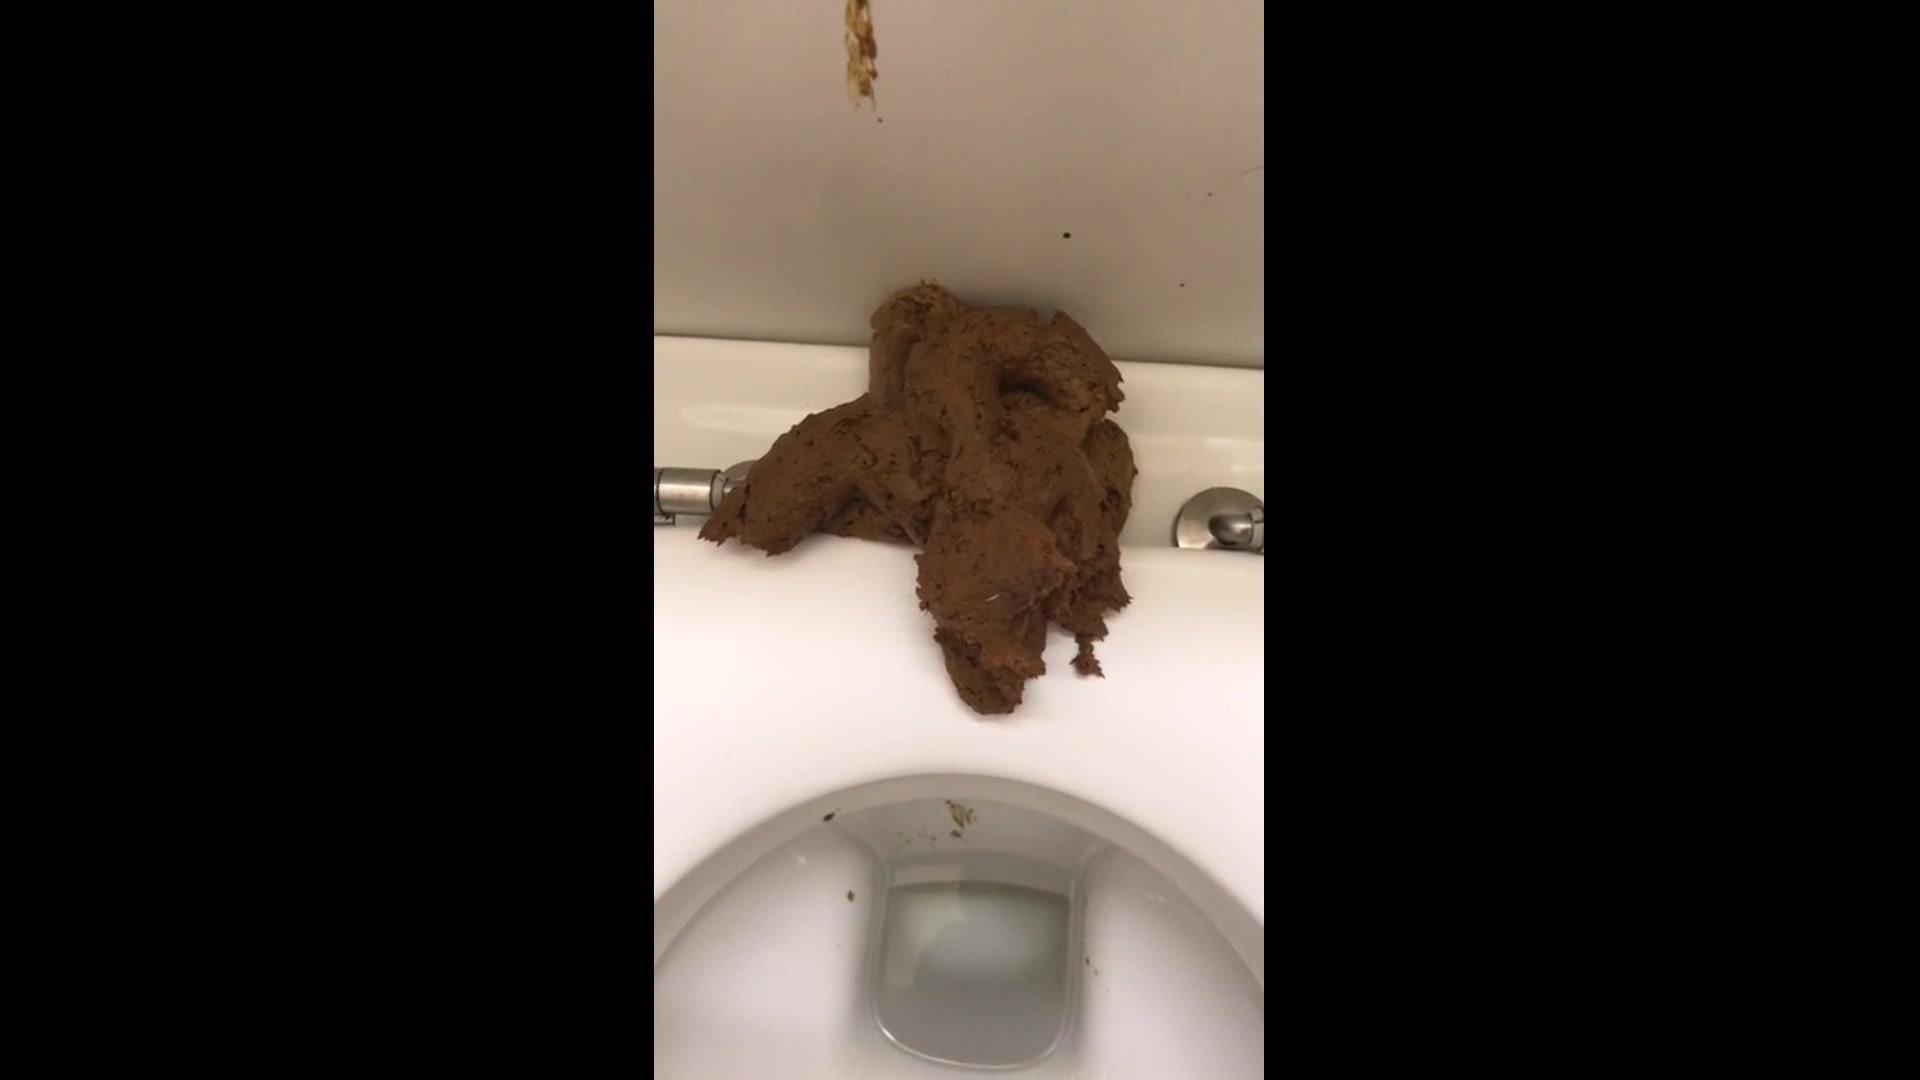 Messing up the toilet at a truckstop near work 05/21/2019